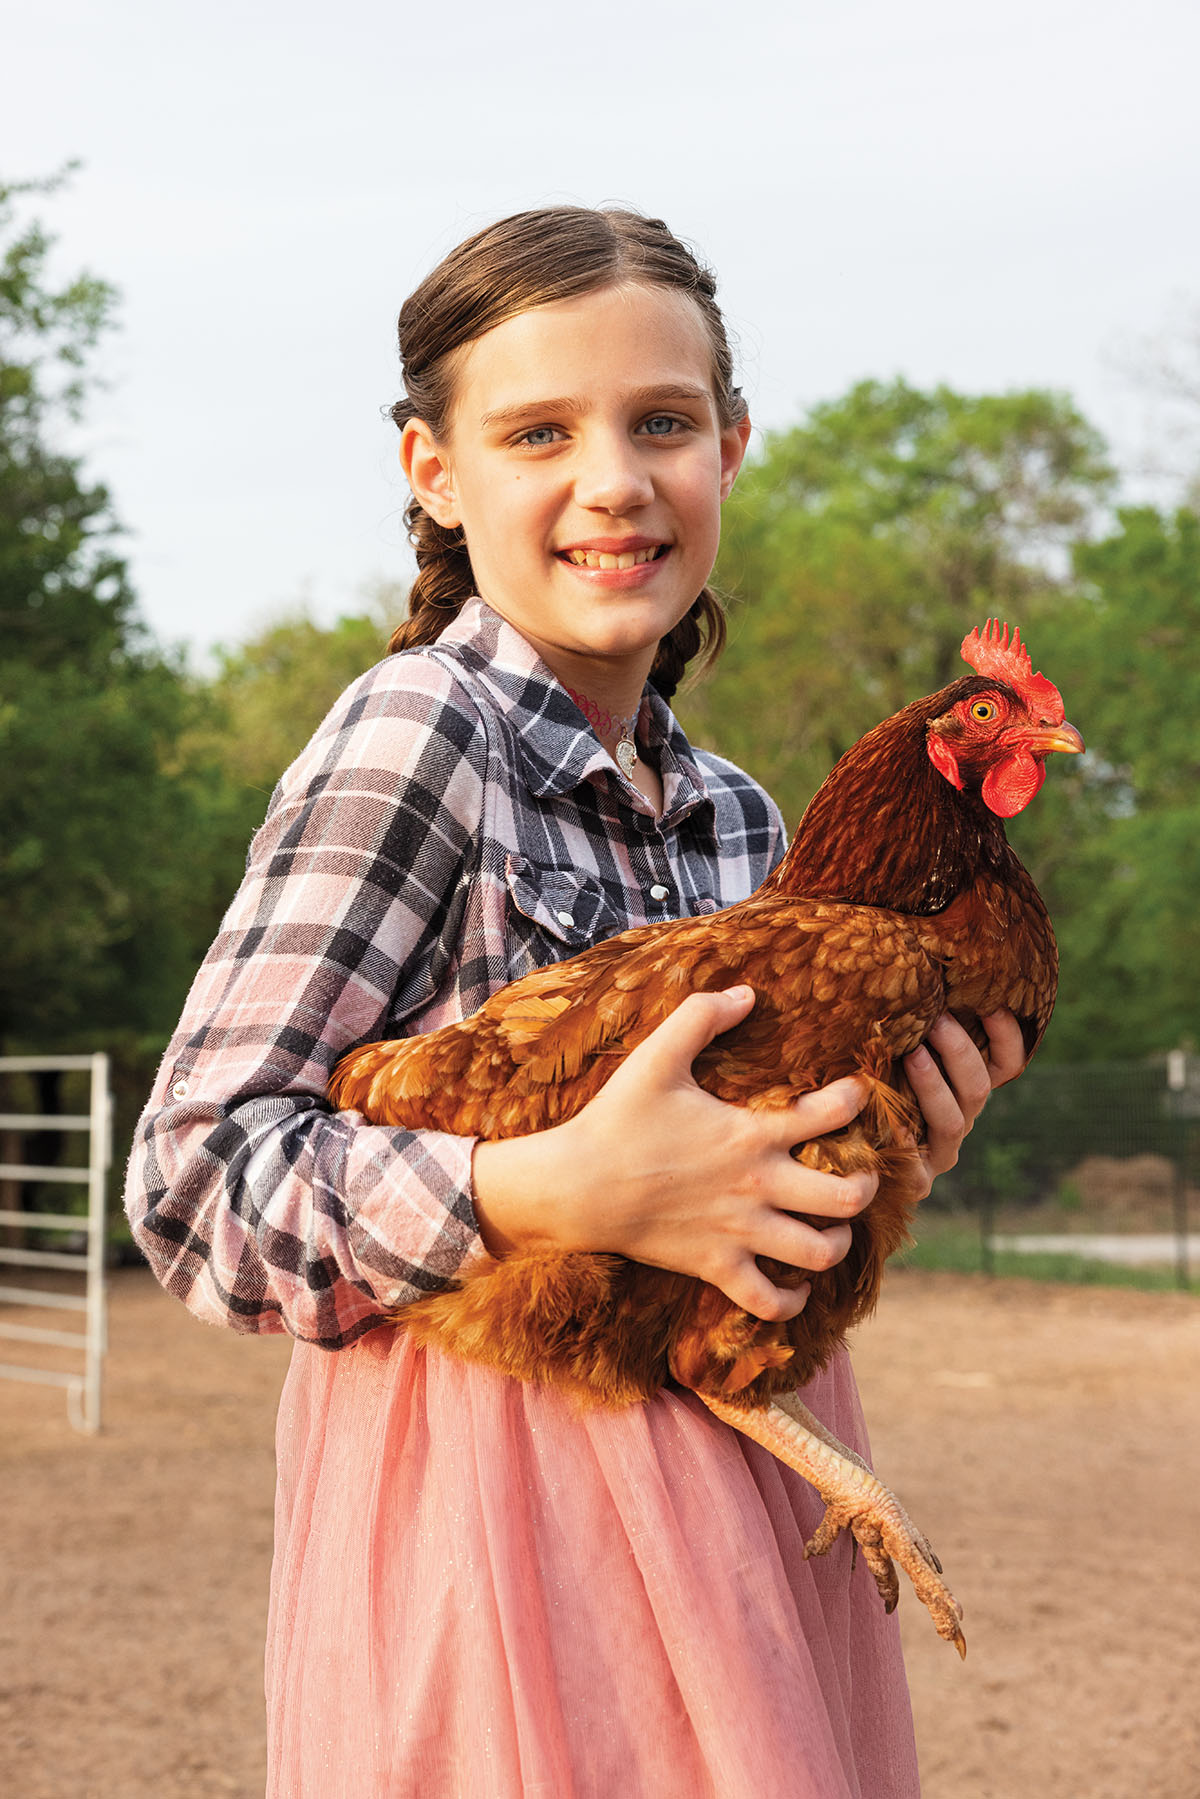 A young woman holds a large red chicken in an outdoor scene